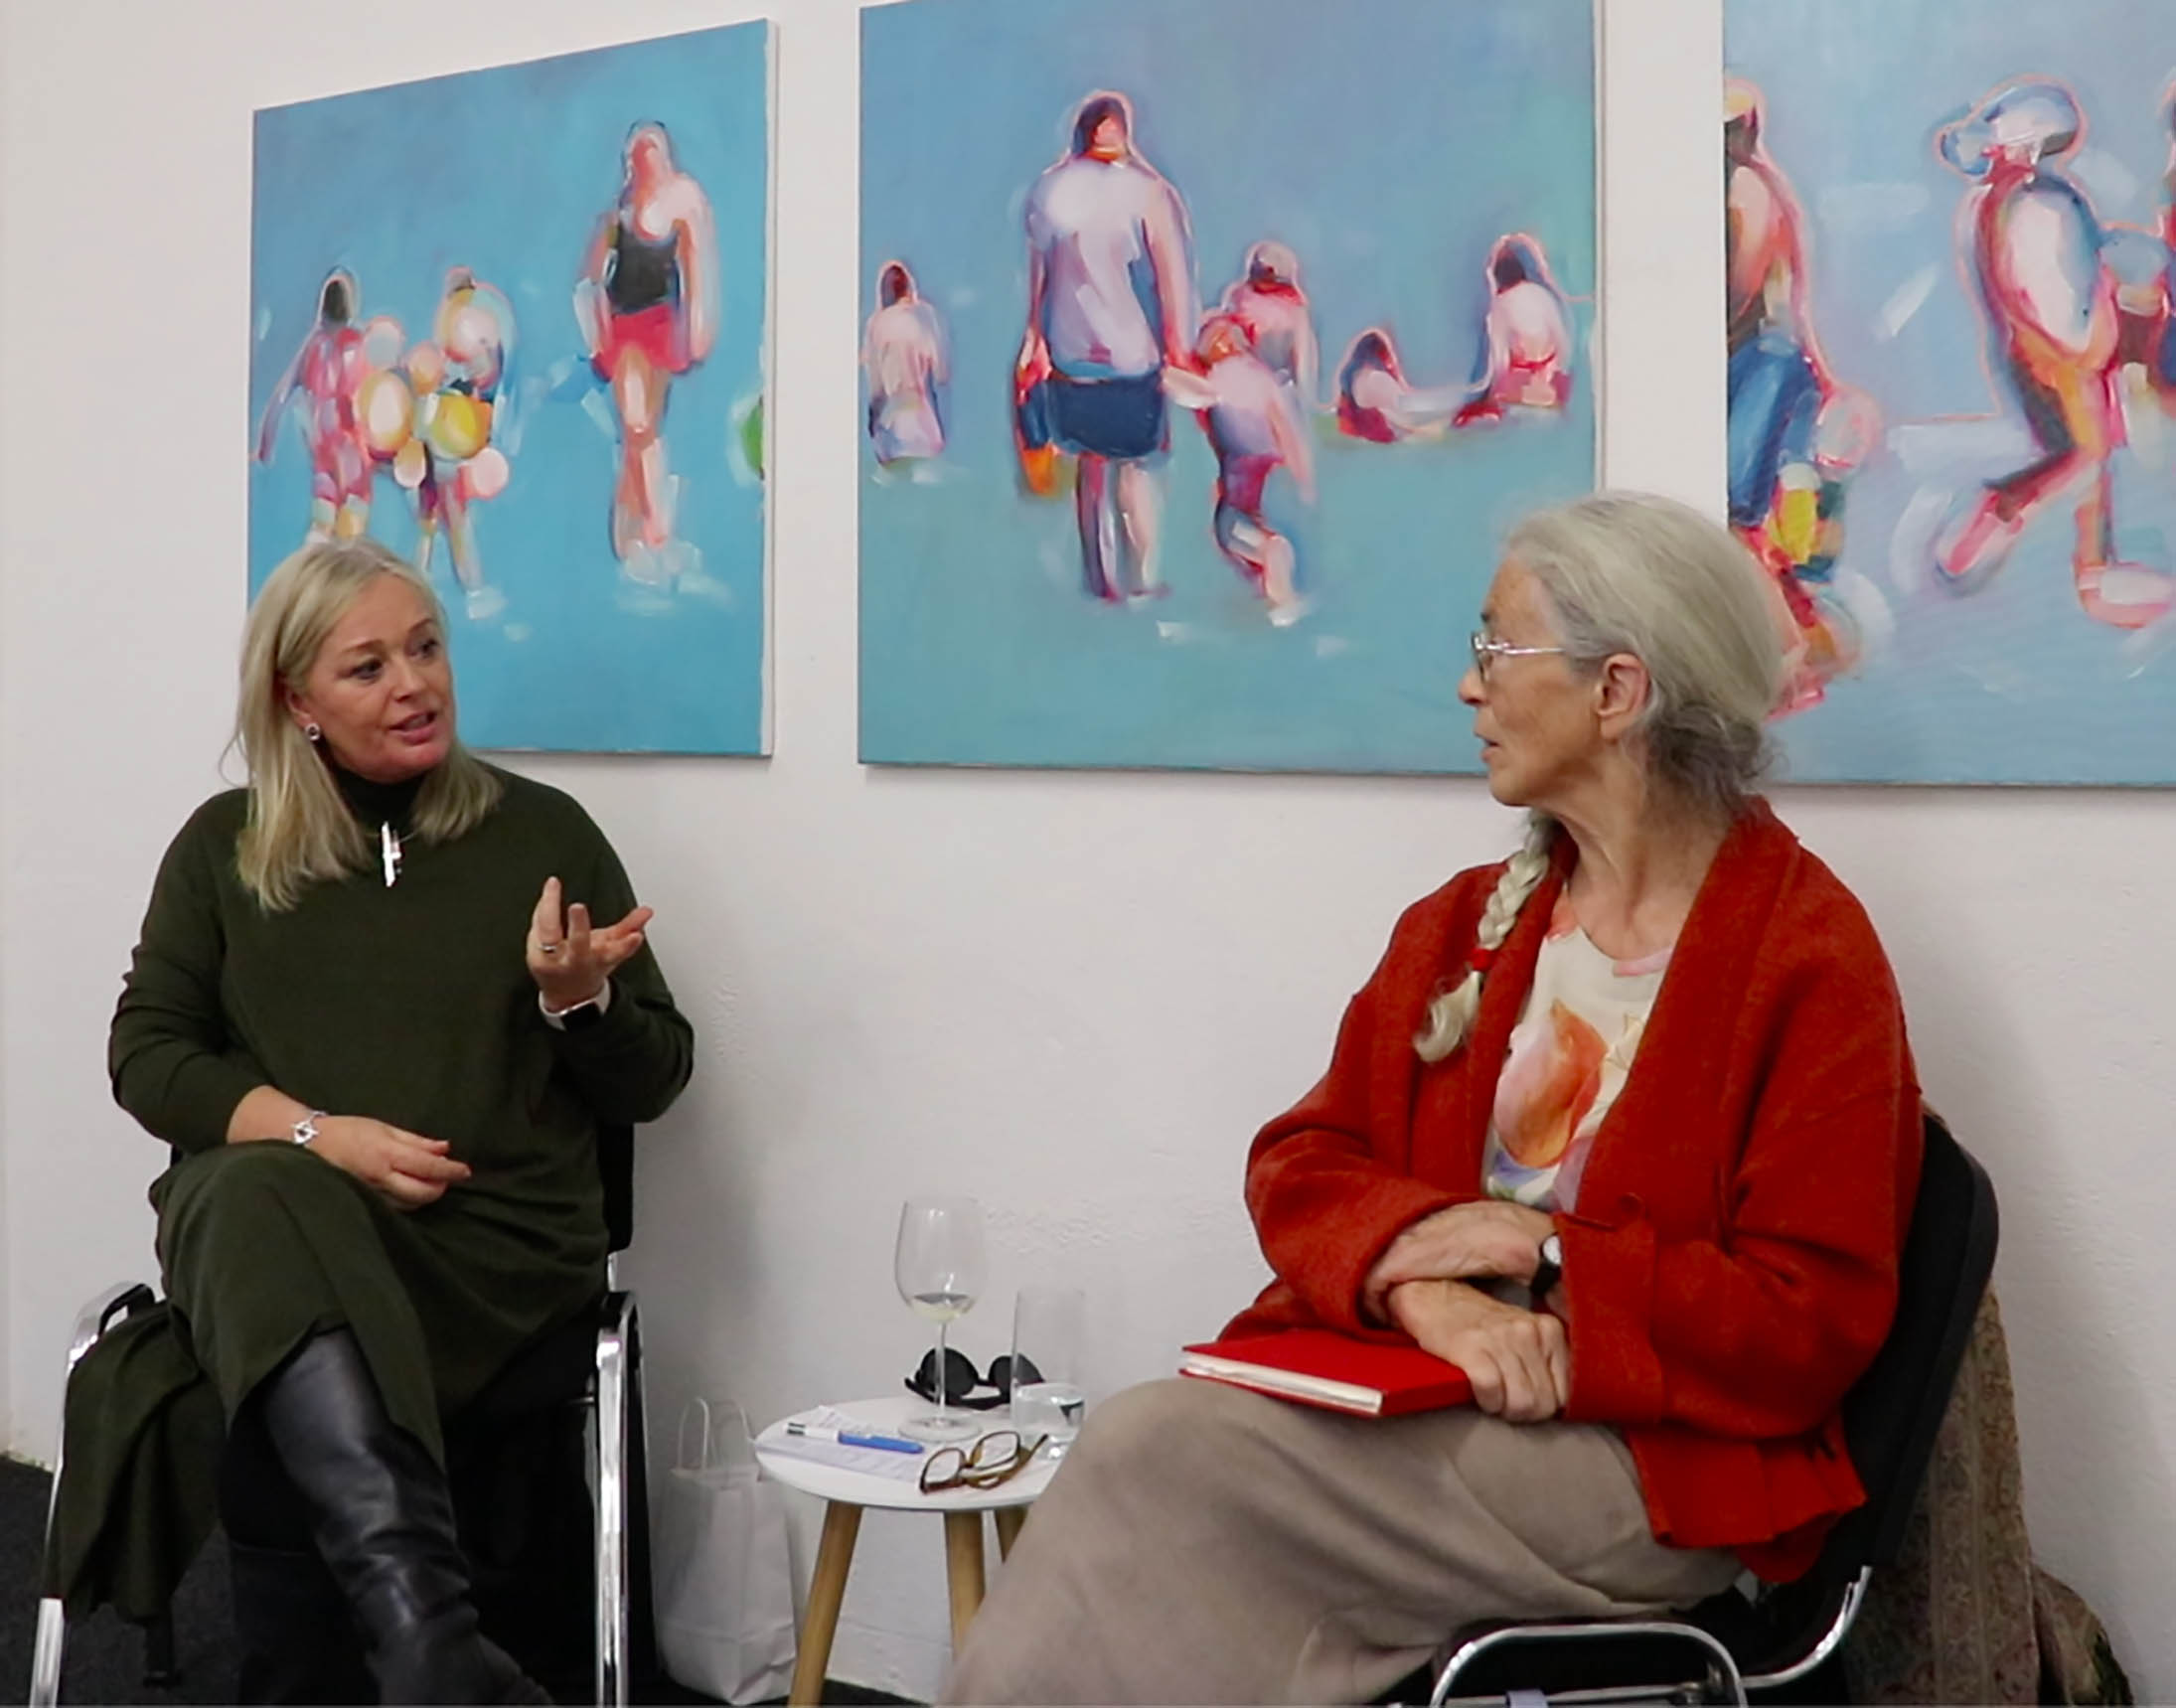 A photo of artist Oonagh Latchford in conversation with art historian and curator Catherine Marshall, in front of three of Oonagh's paintings. The artworks are of abstracted beach scenes, people playing, walking and just standing taking in the sea.